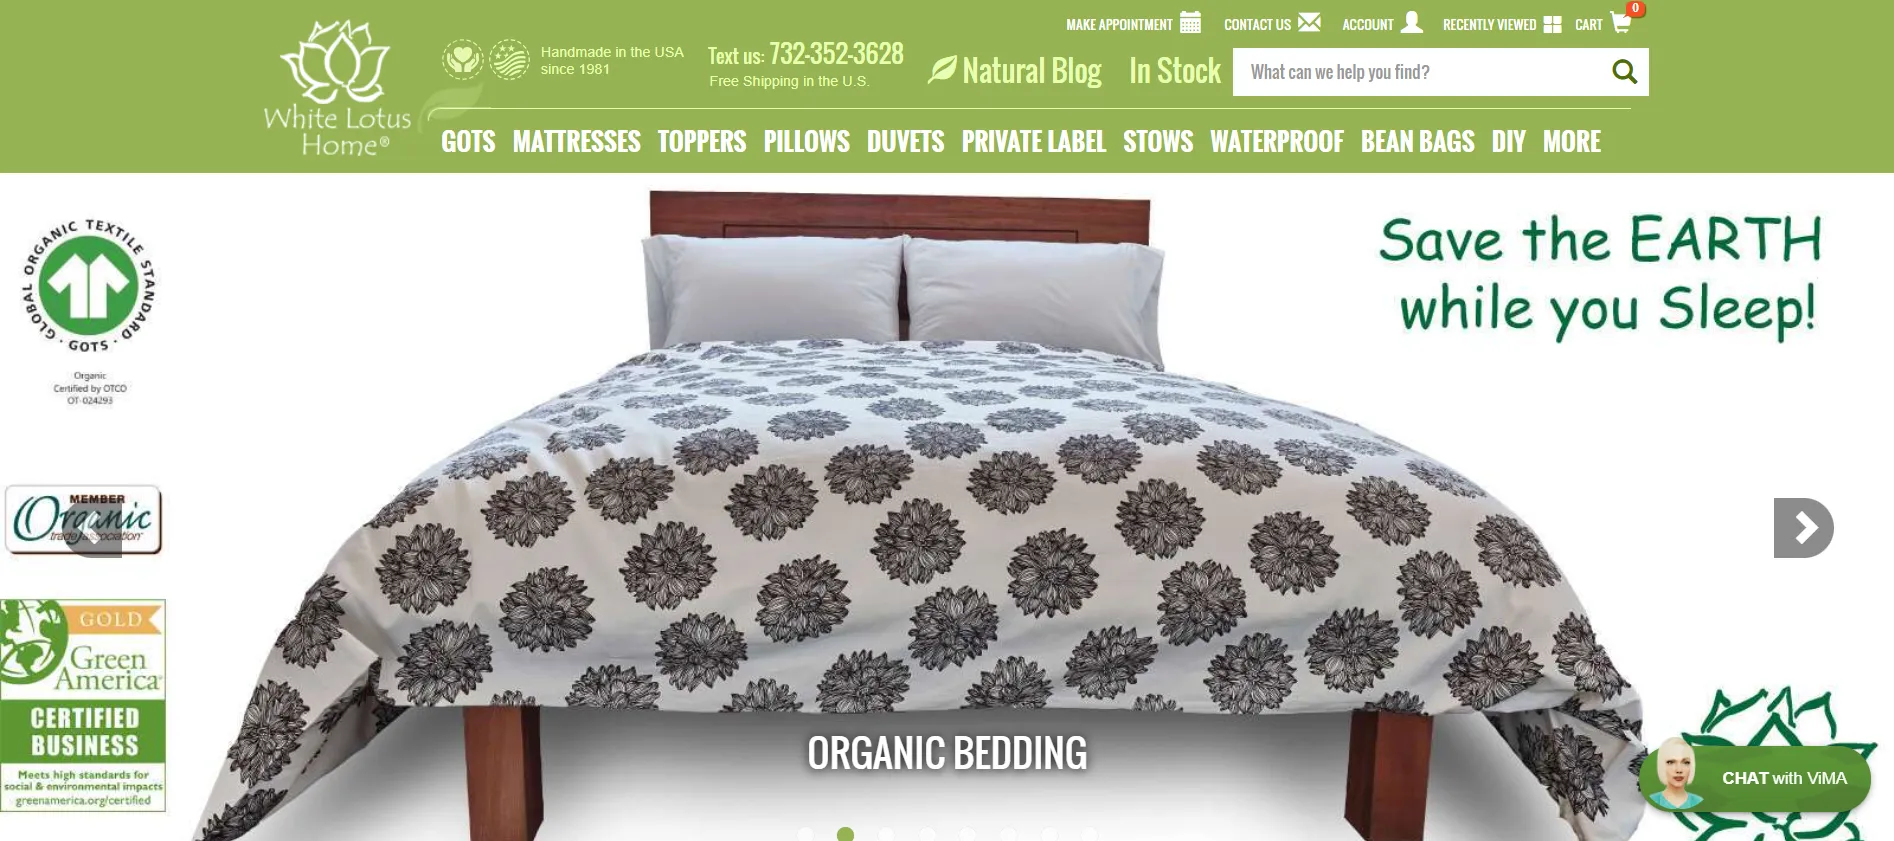 White Lotus Home are experts in organic bedding using eco-friendly materials